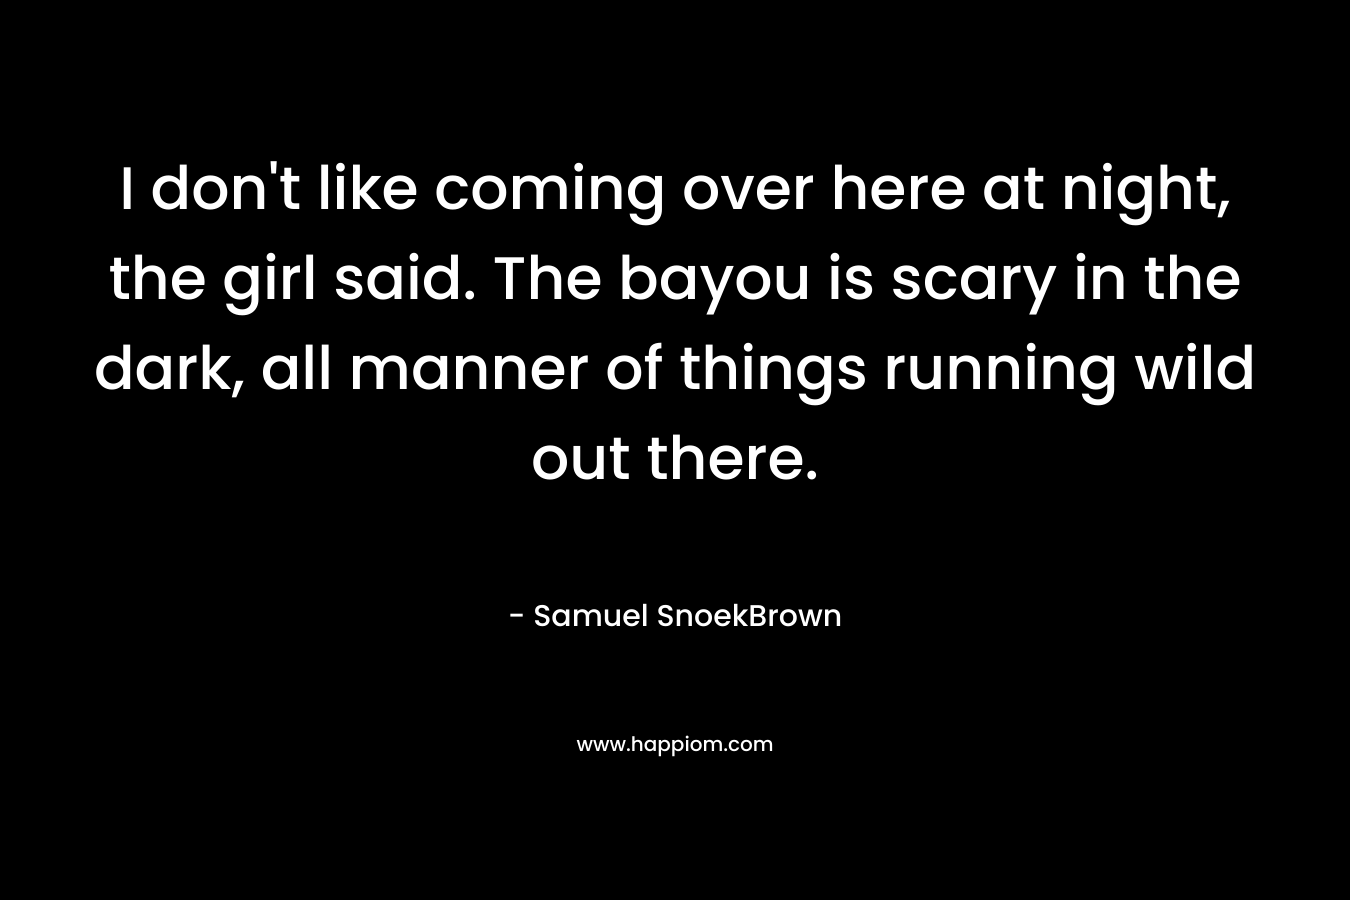 I don’t like coming over here at night, the girl said. The bayou is scary in the dark, all manner of things running wild out there. – Samuel SnoekBrown